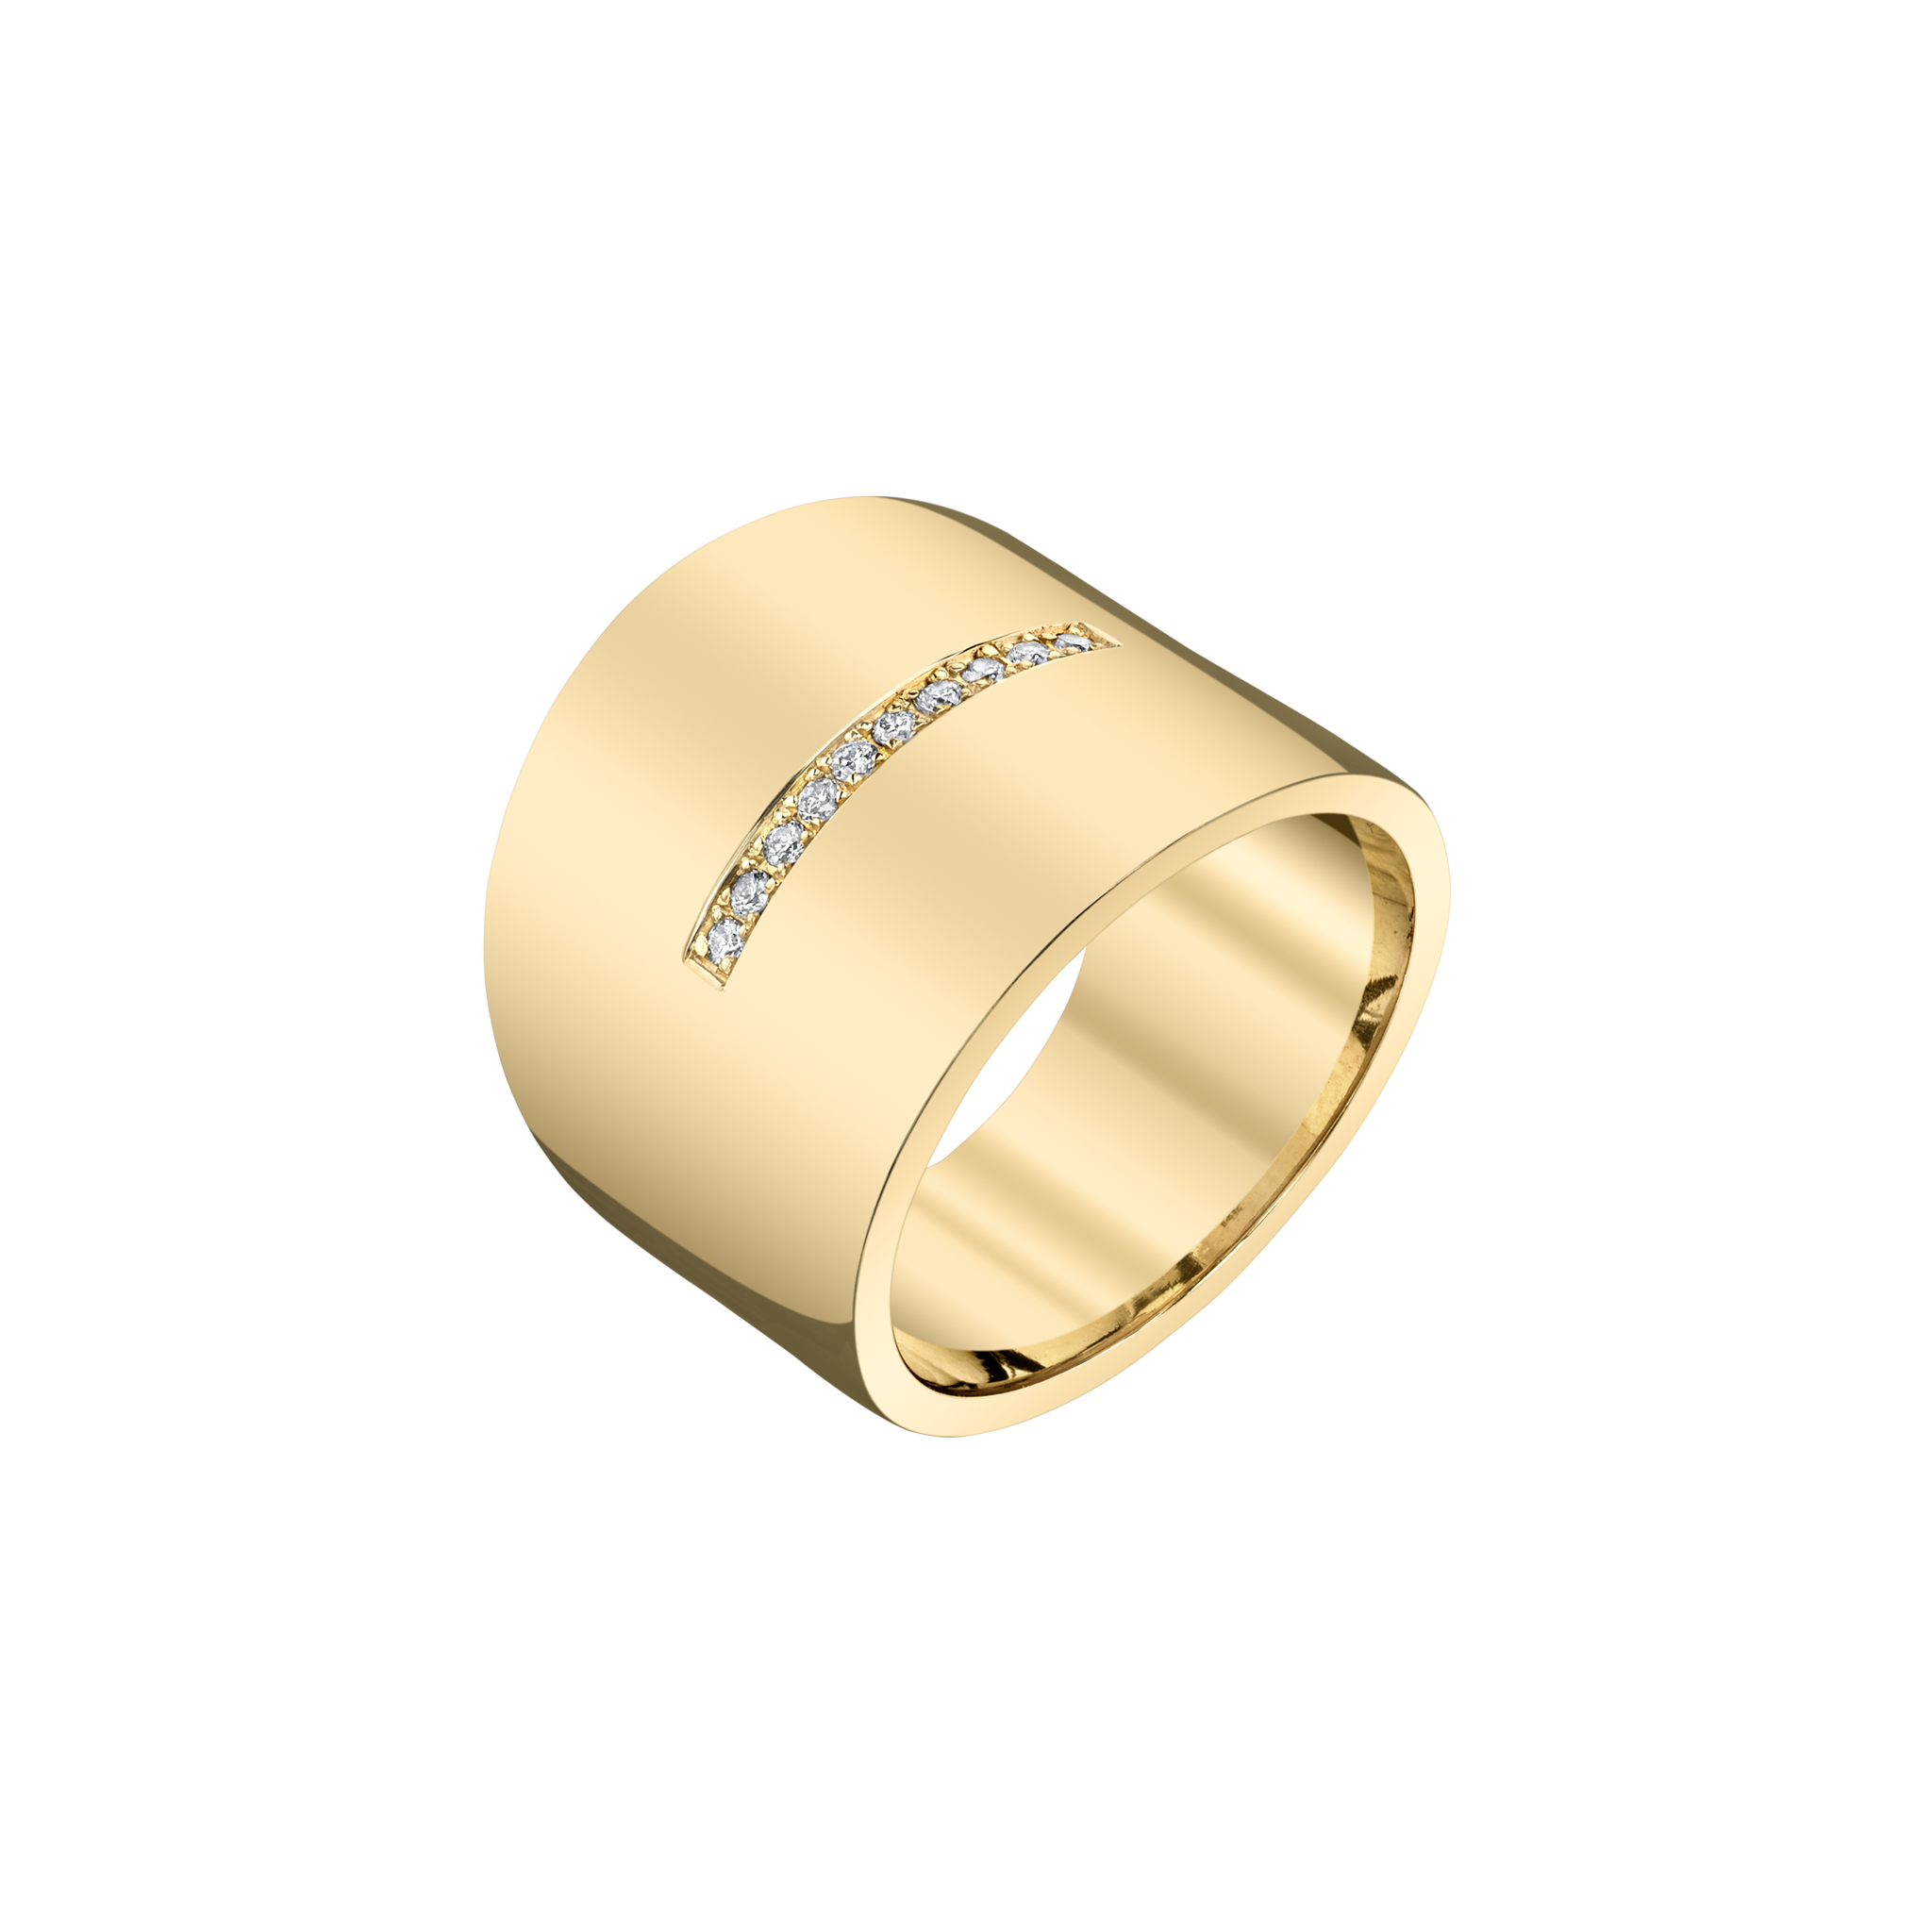 Cigar Band Ring with Row of White Pavé Diamonds